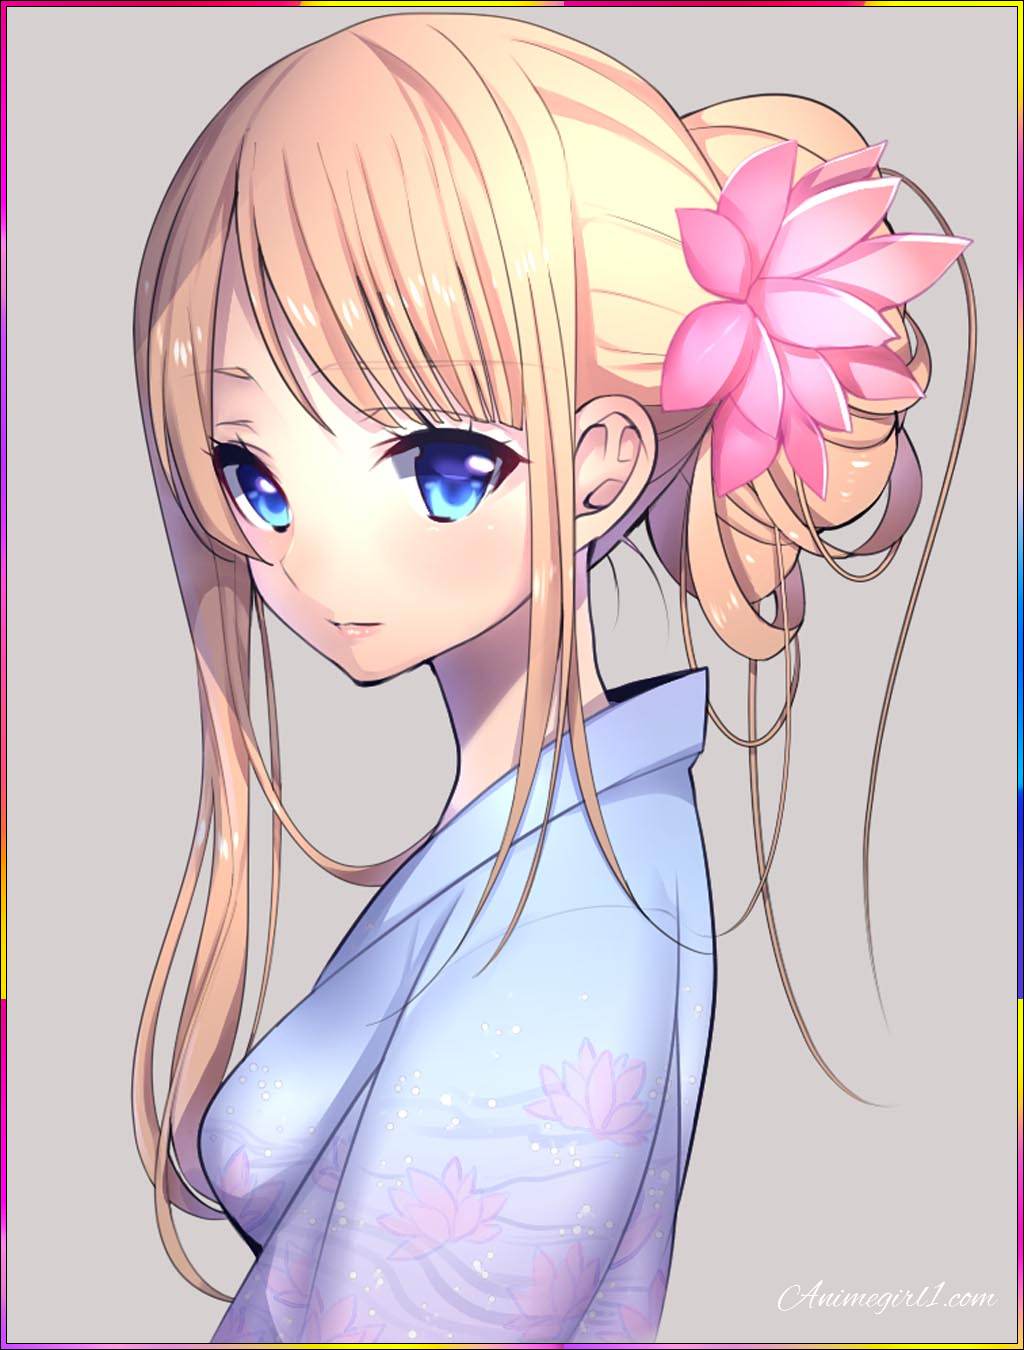 cute anime girl with pink flower in hair